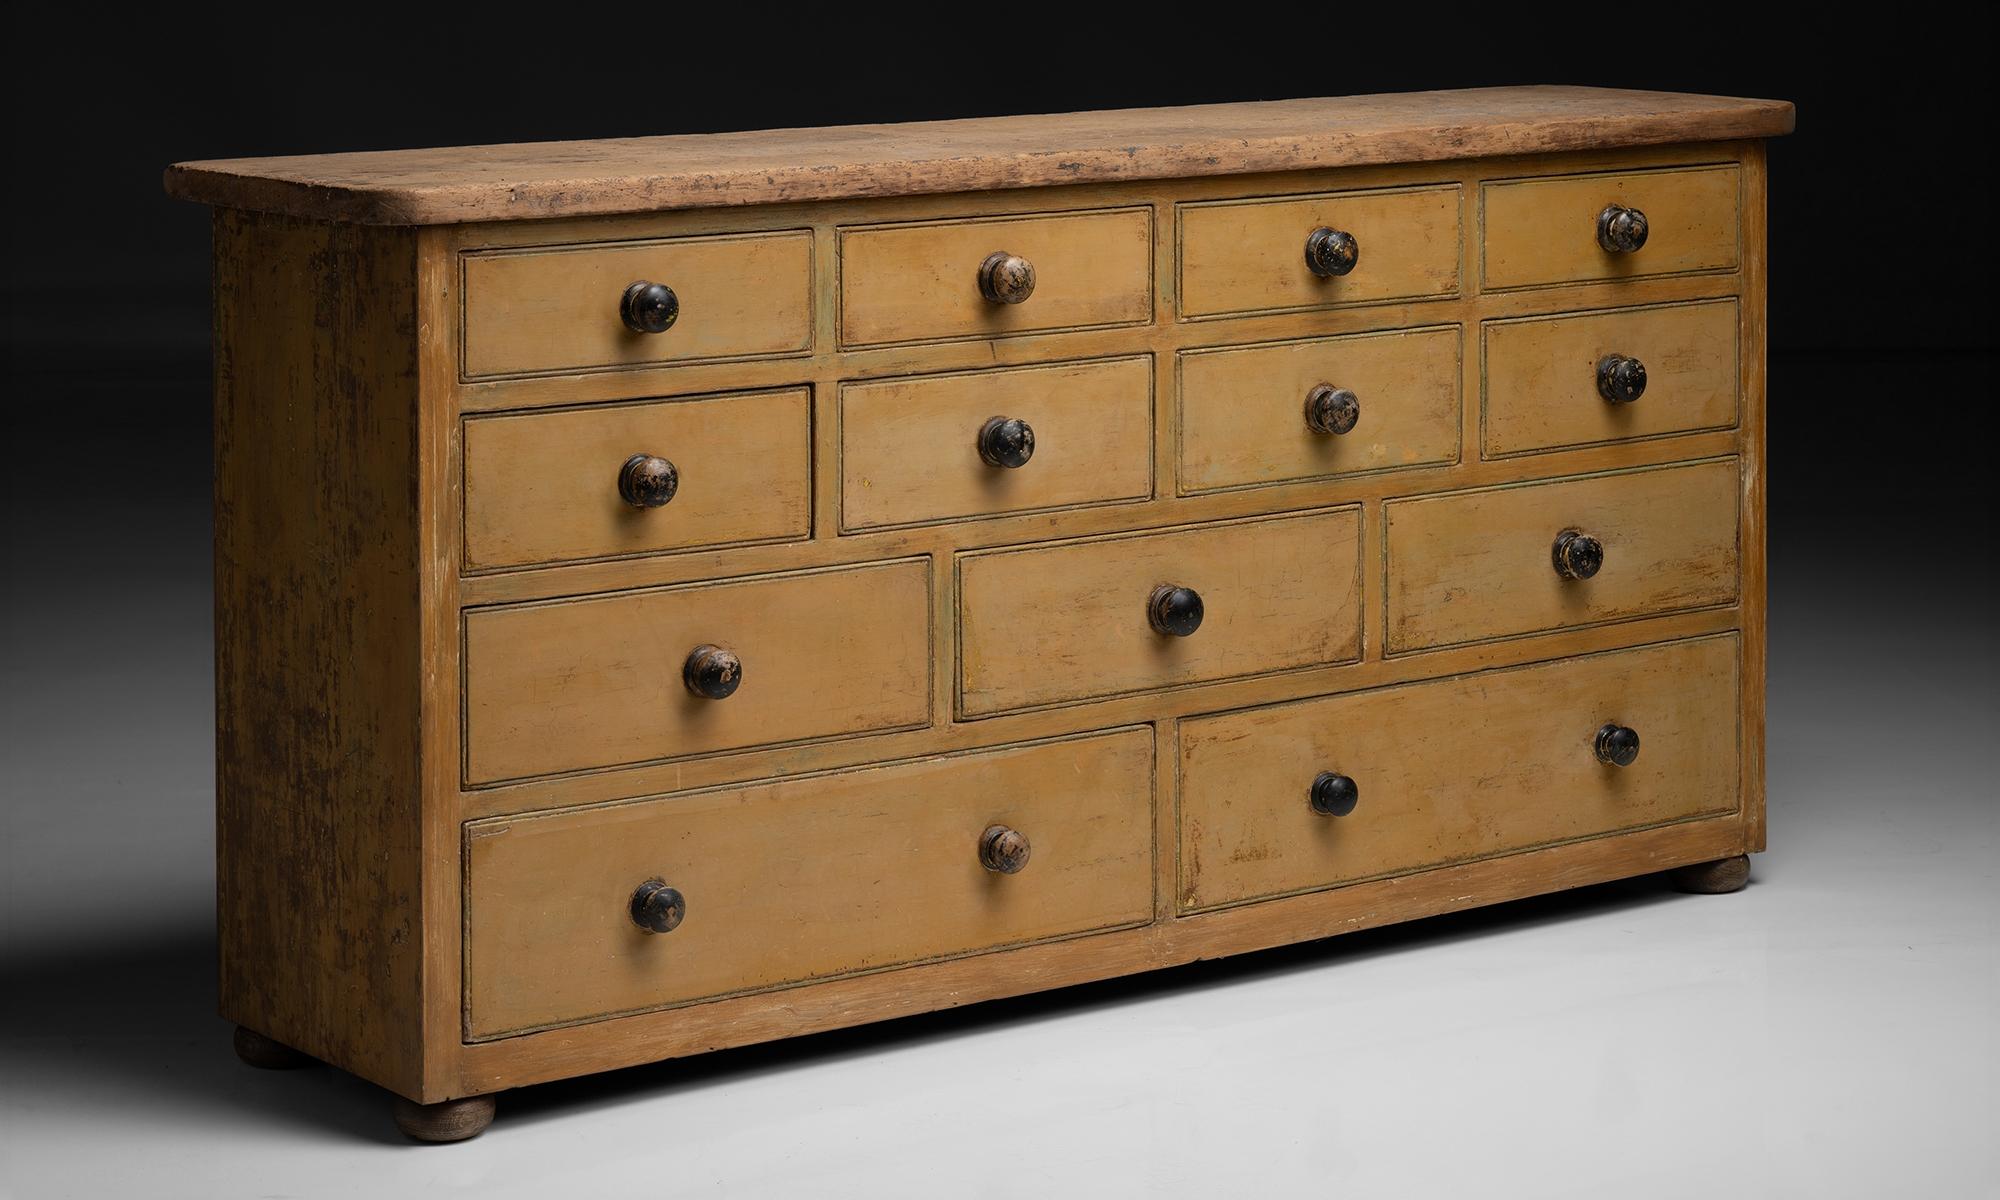 Made in England circa 1890

Scrubbed pine plank top, over drawers in original period finish with ebonised handles.

72